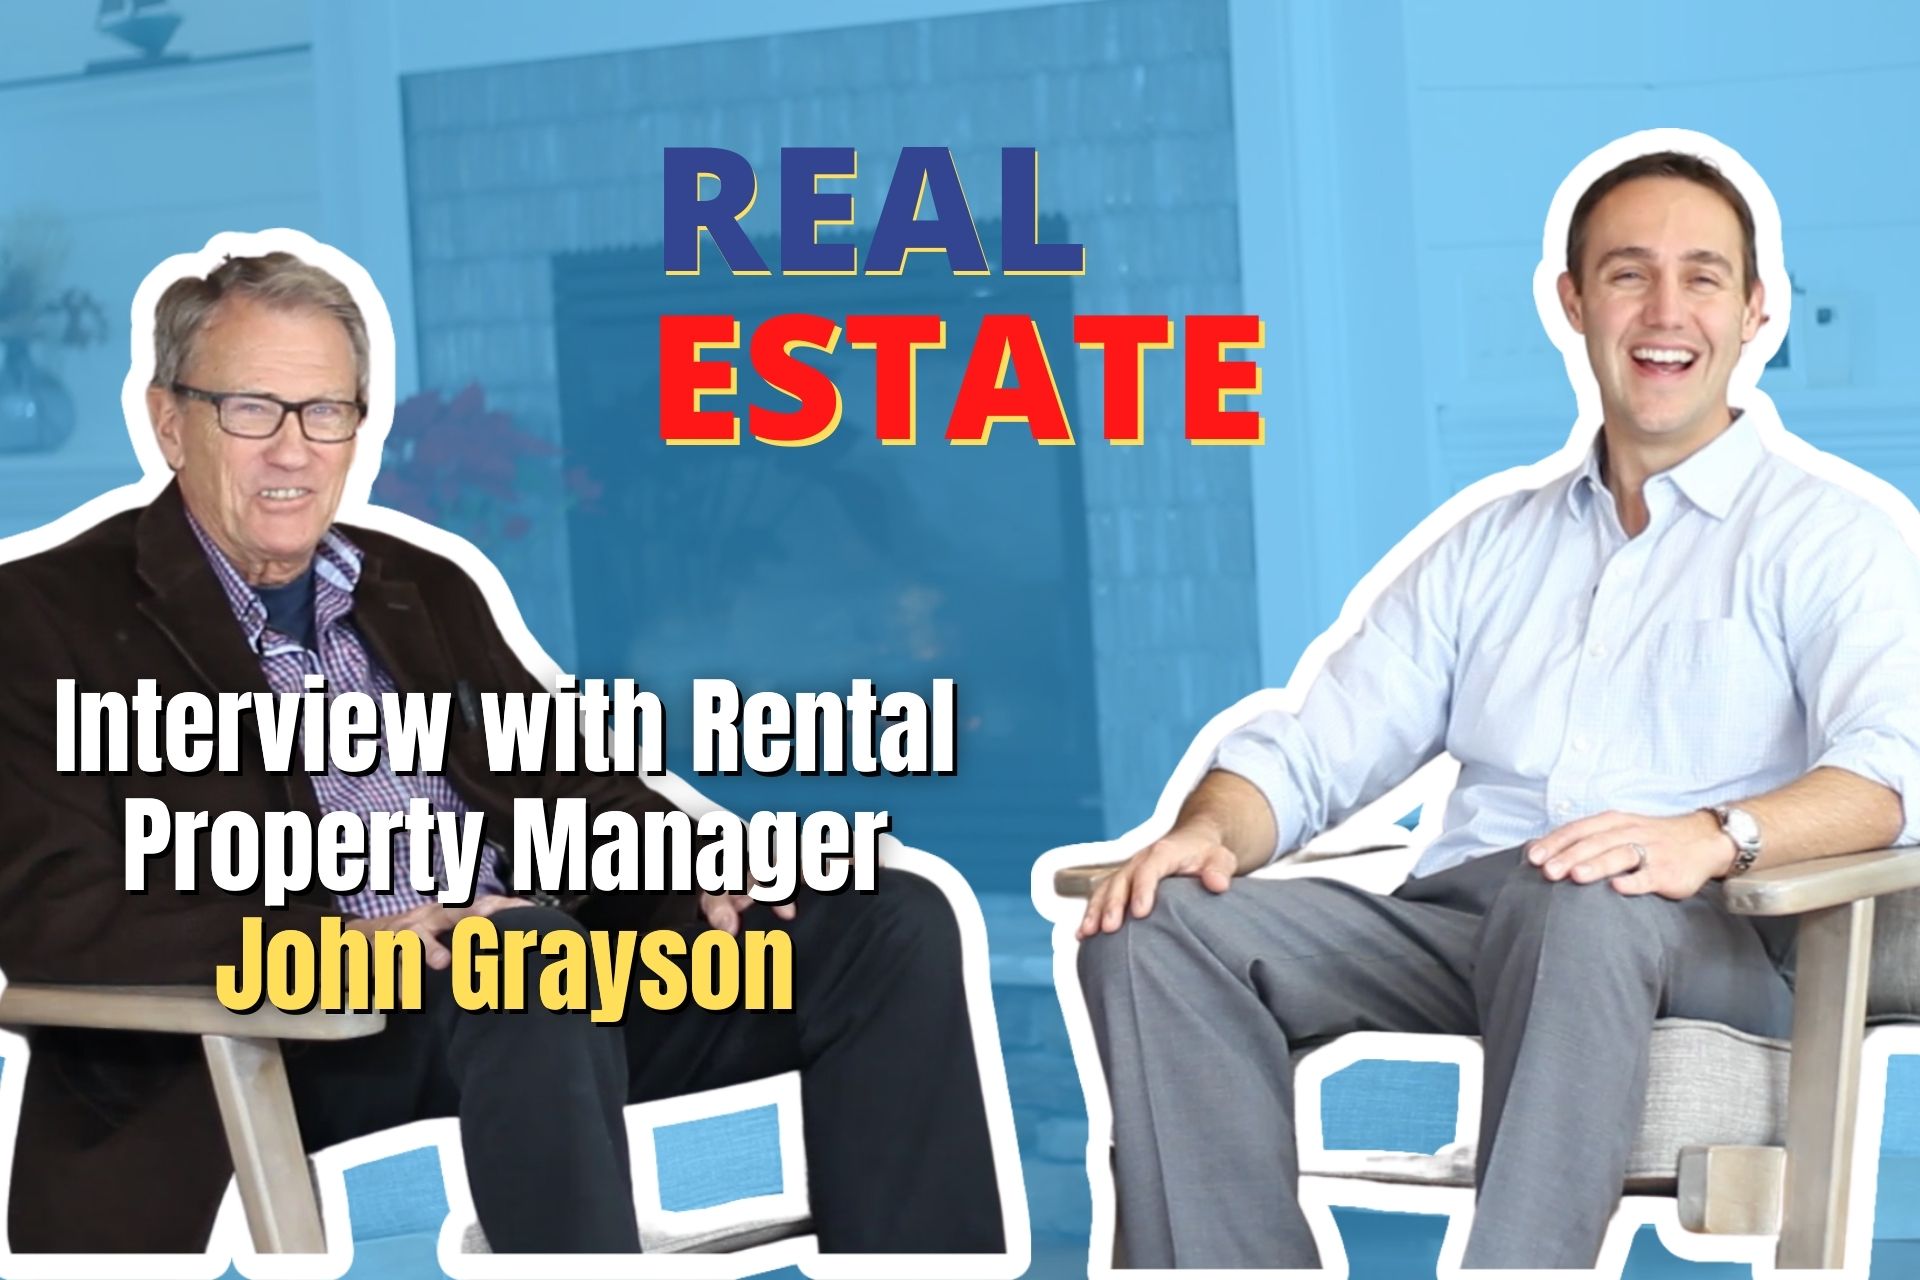 Interview with Rental Property Manager John Grayson